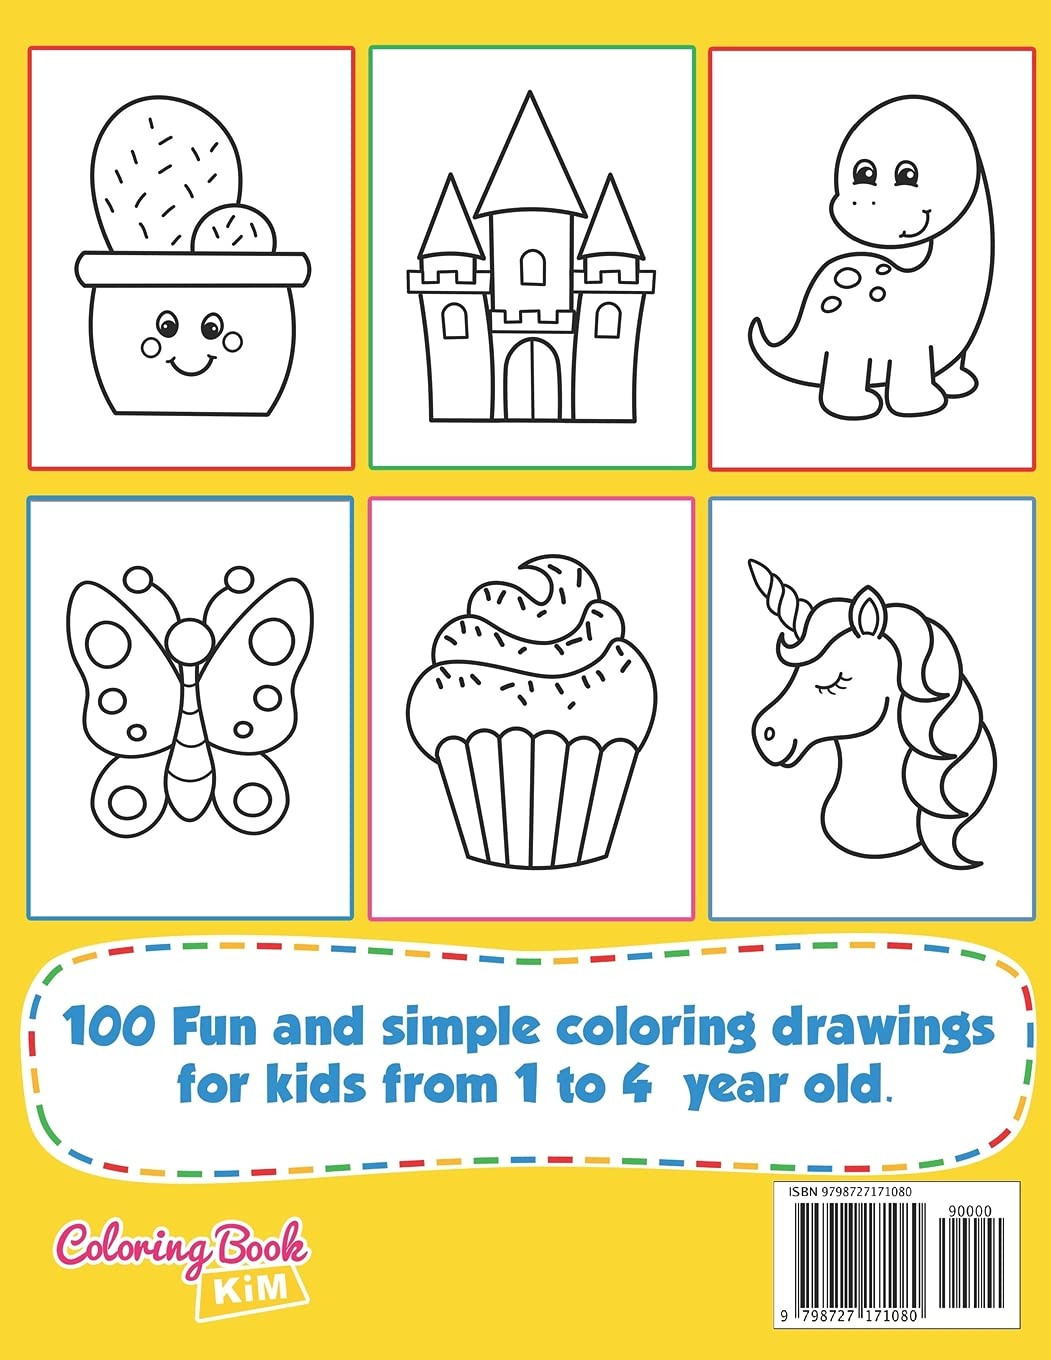 Simple & Big Coloring Book for Toddler: 100 Easy and Fun Coloring